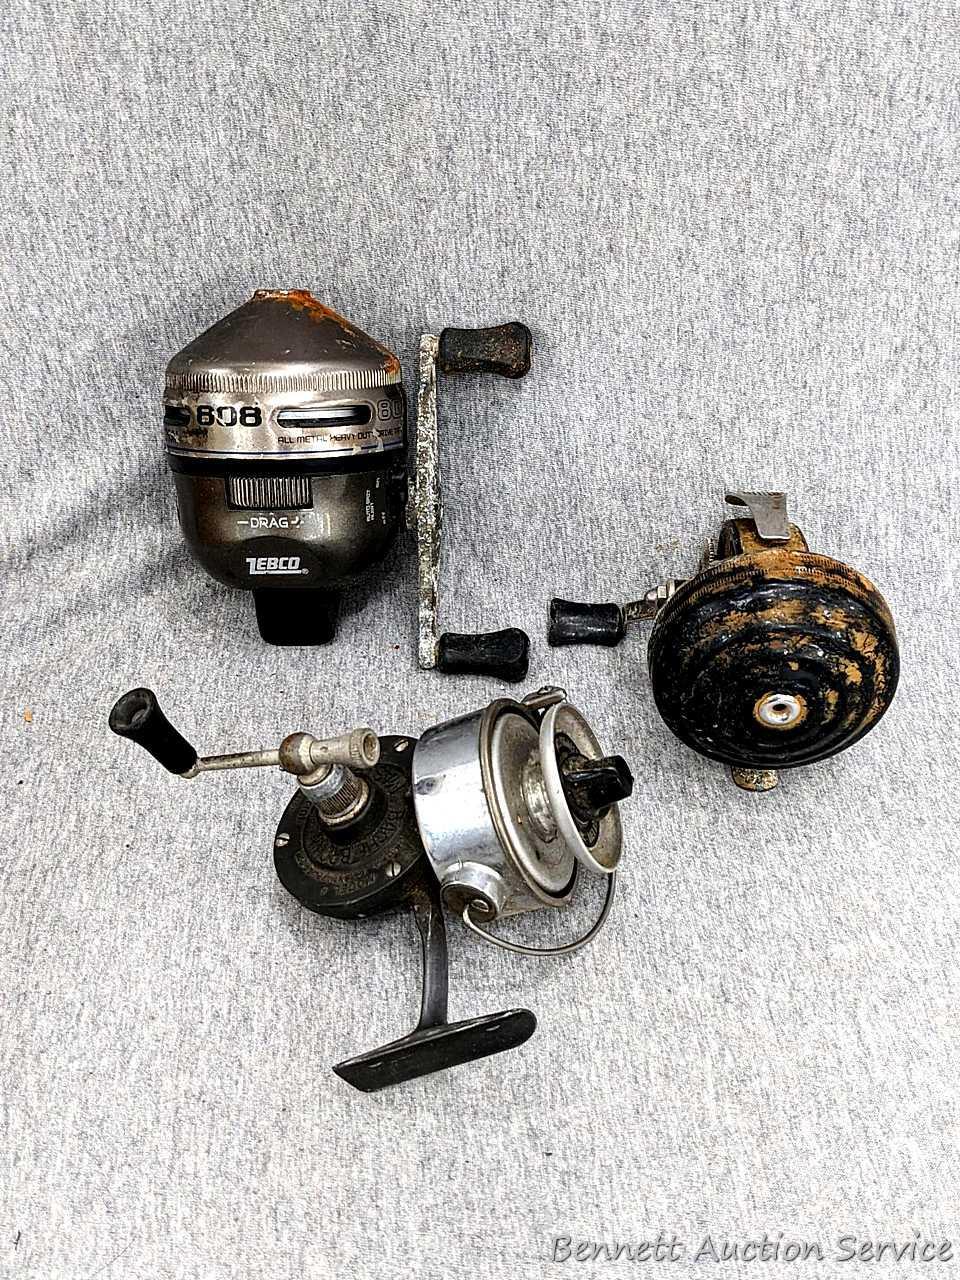 Open and closed fishing reels incl vintage Bache